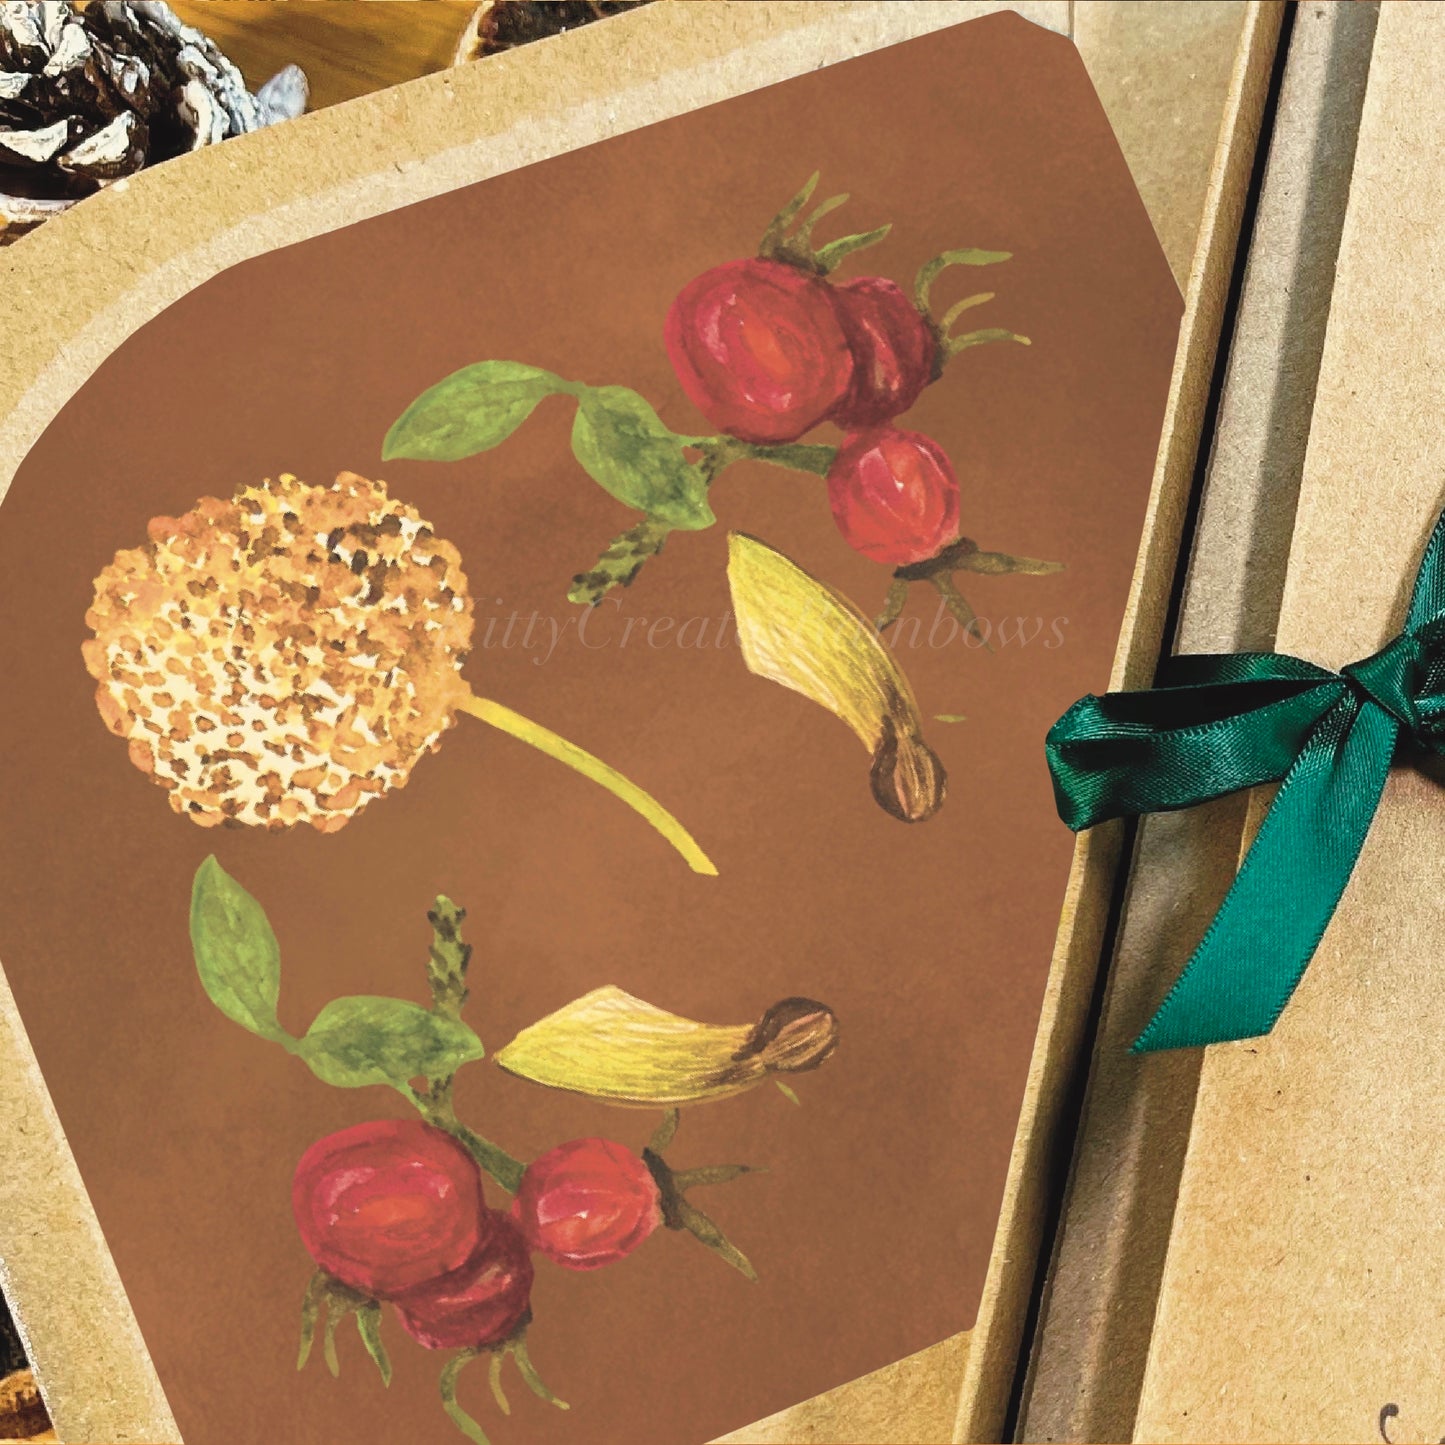 Woodland walk decorative inlay with rose hips and seeds on the inside of a manila envelope